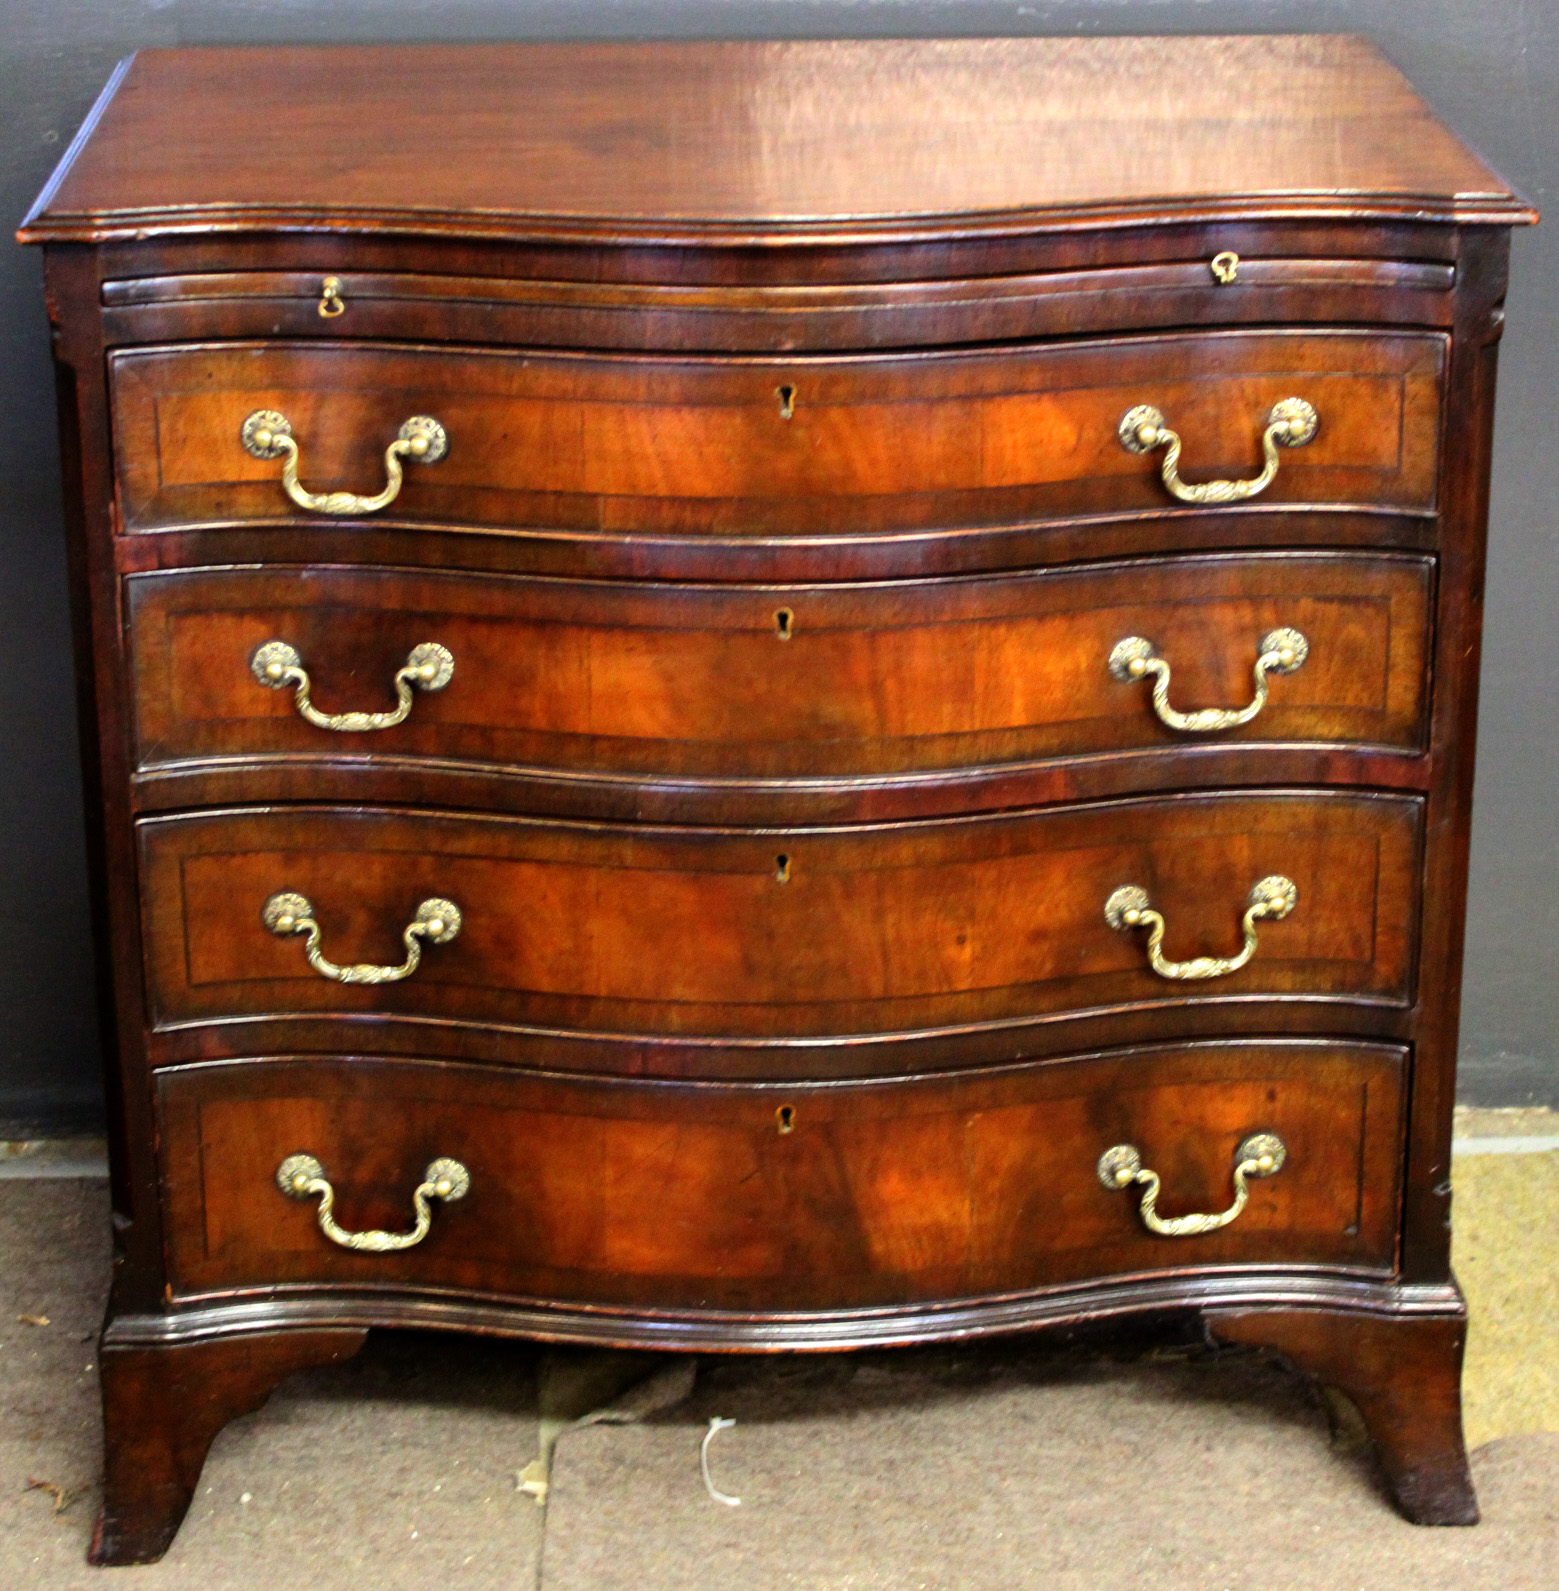 Reproduction mahogany serpentine front bachelor's chest with brushing slide over four drawers with